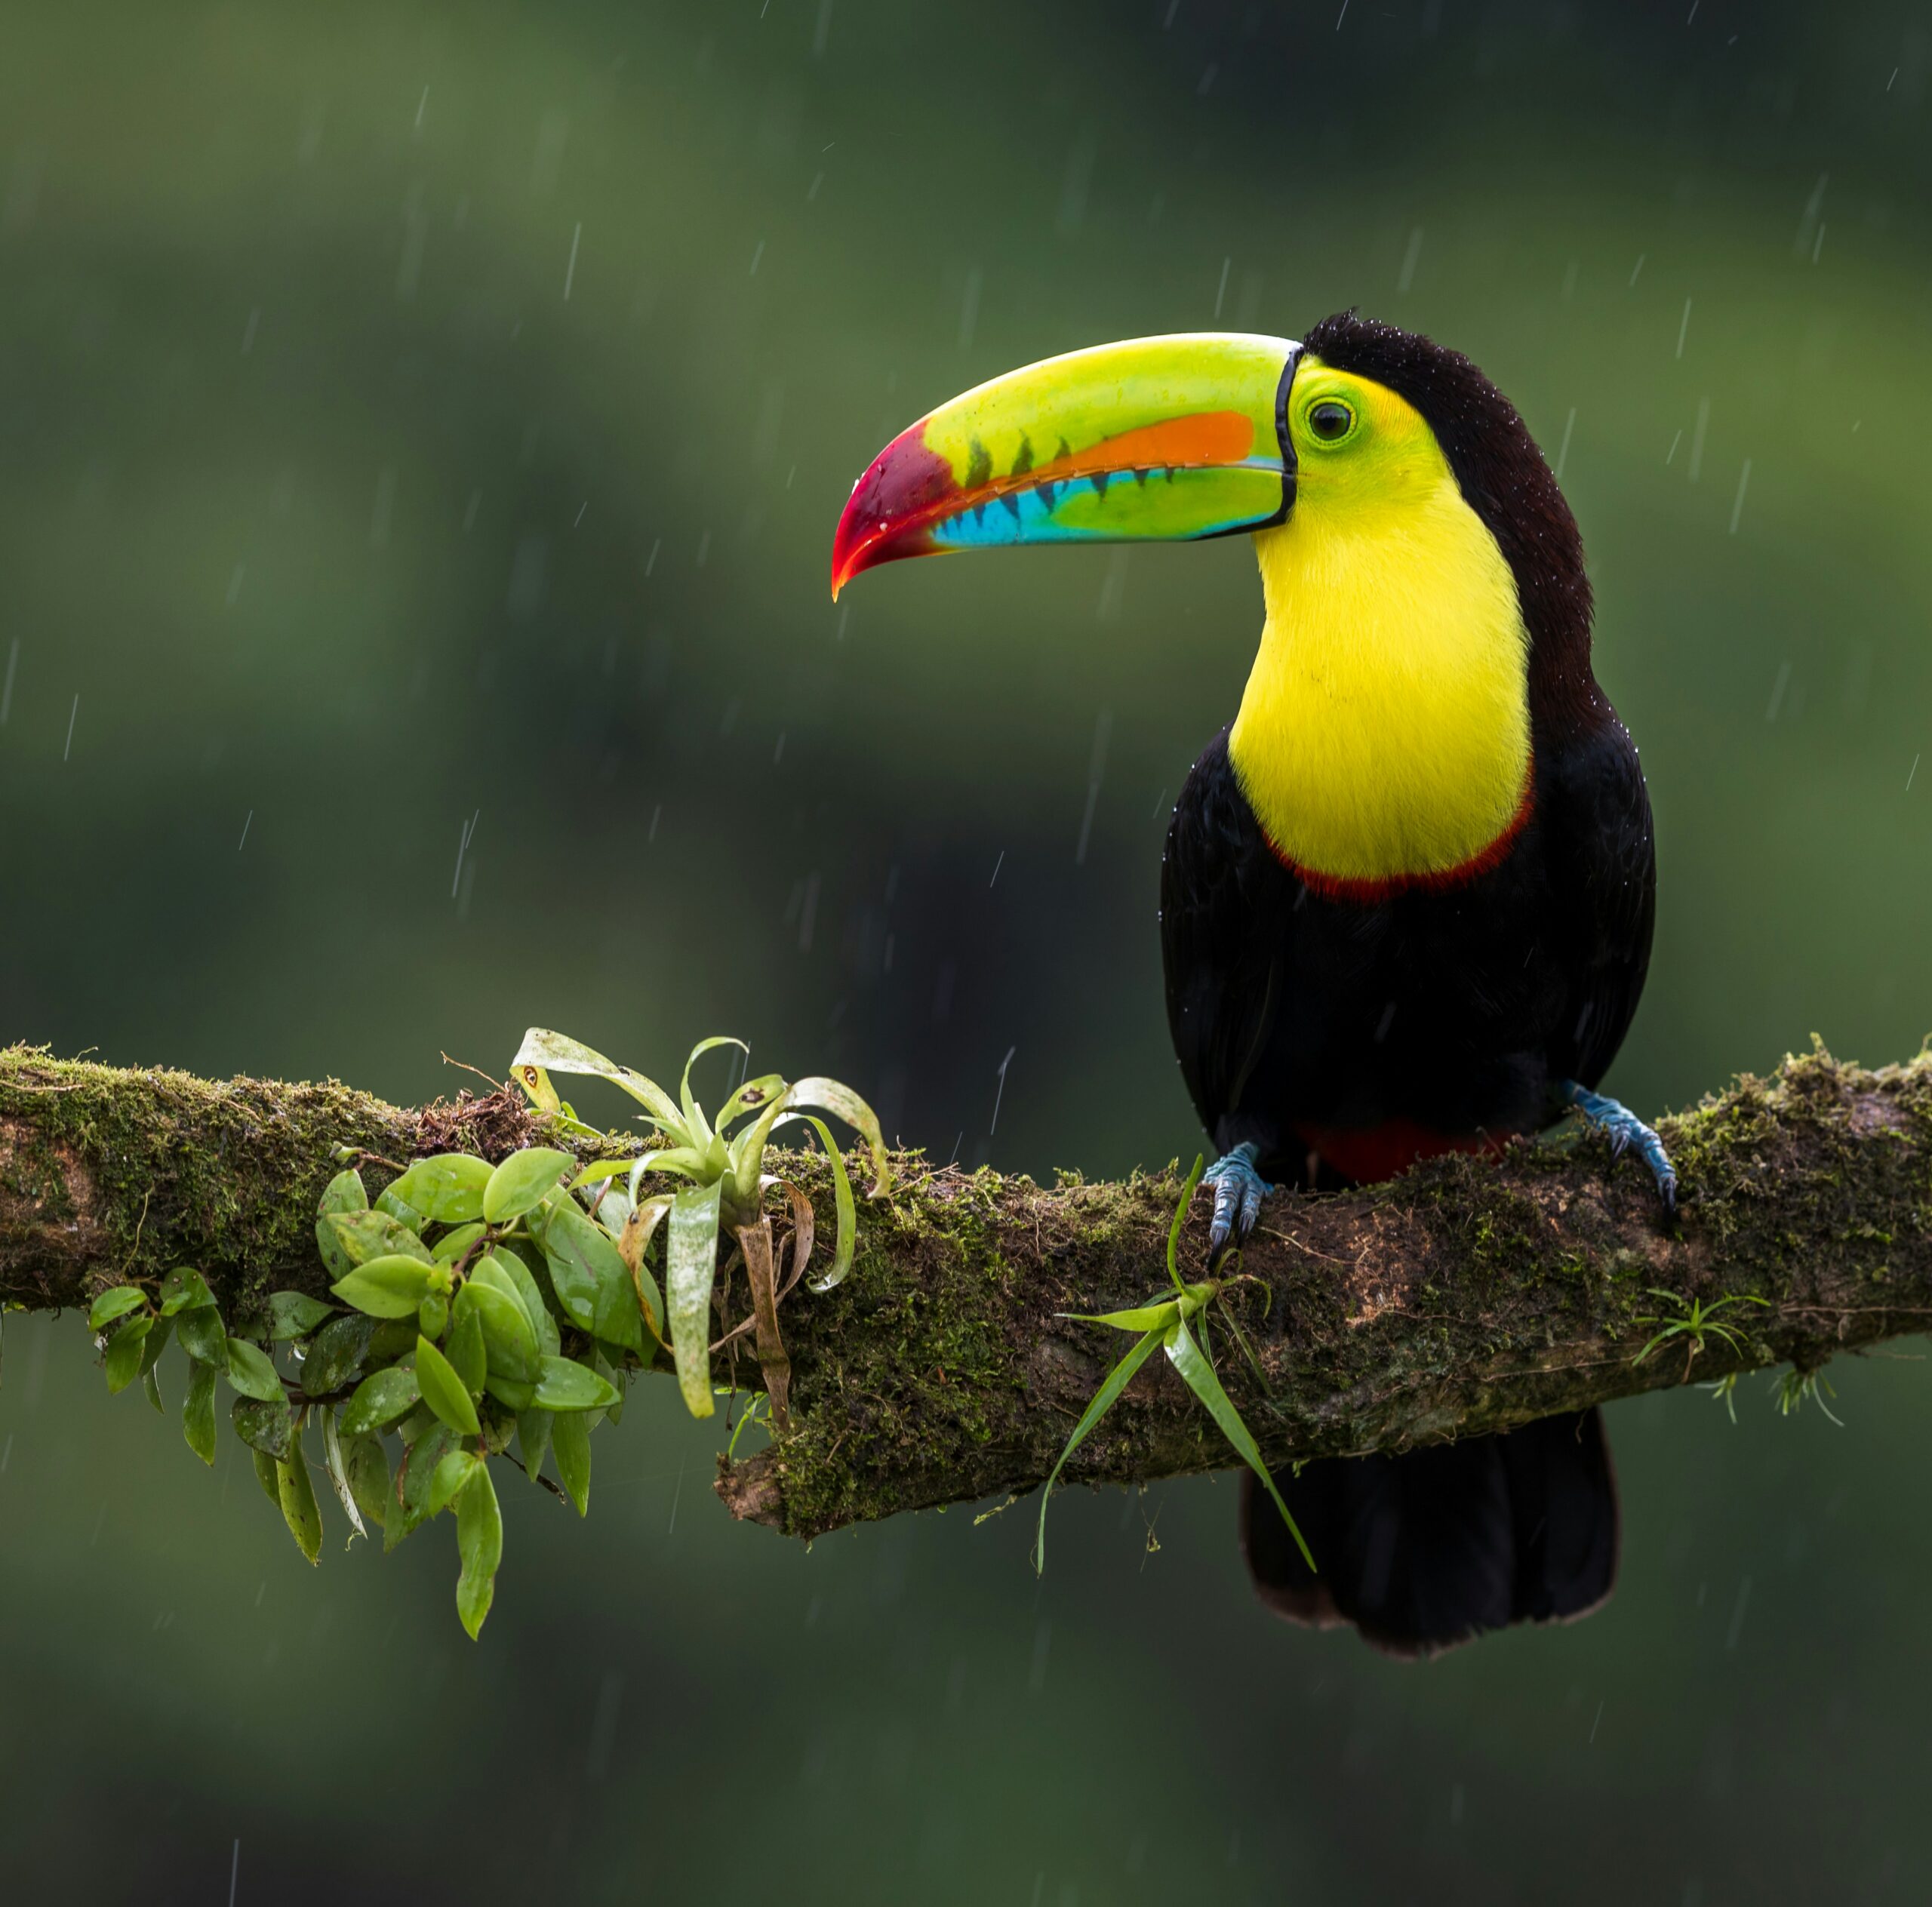 What Are The Options For Guided Bird-watching Tours In Nicaragua?